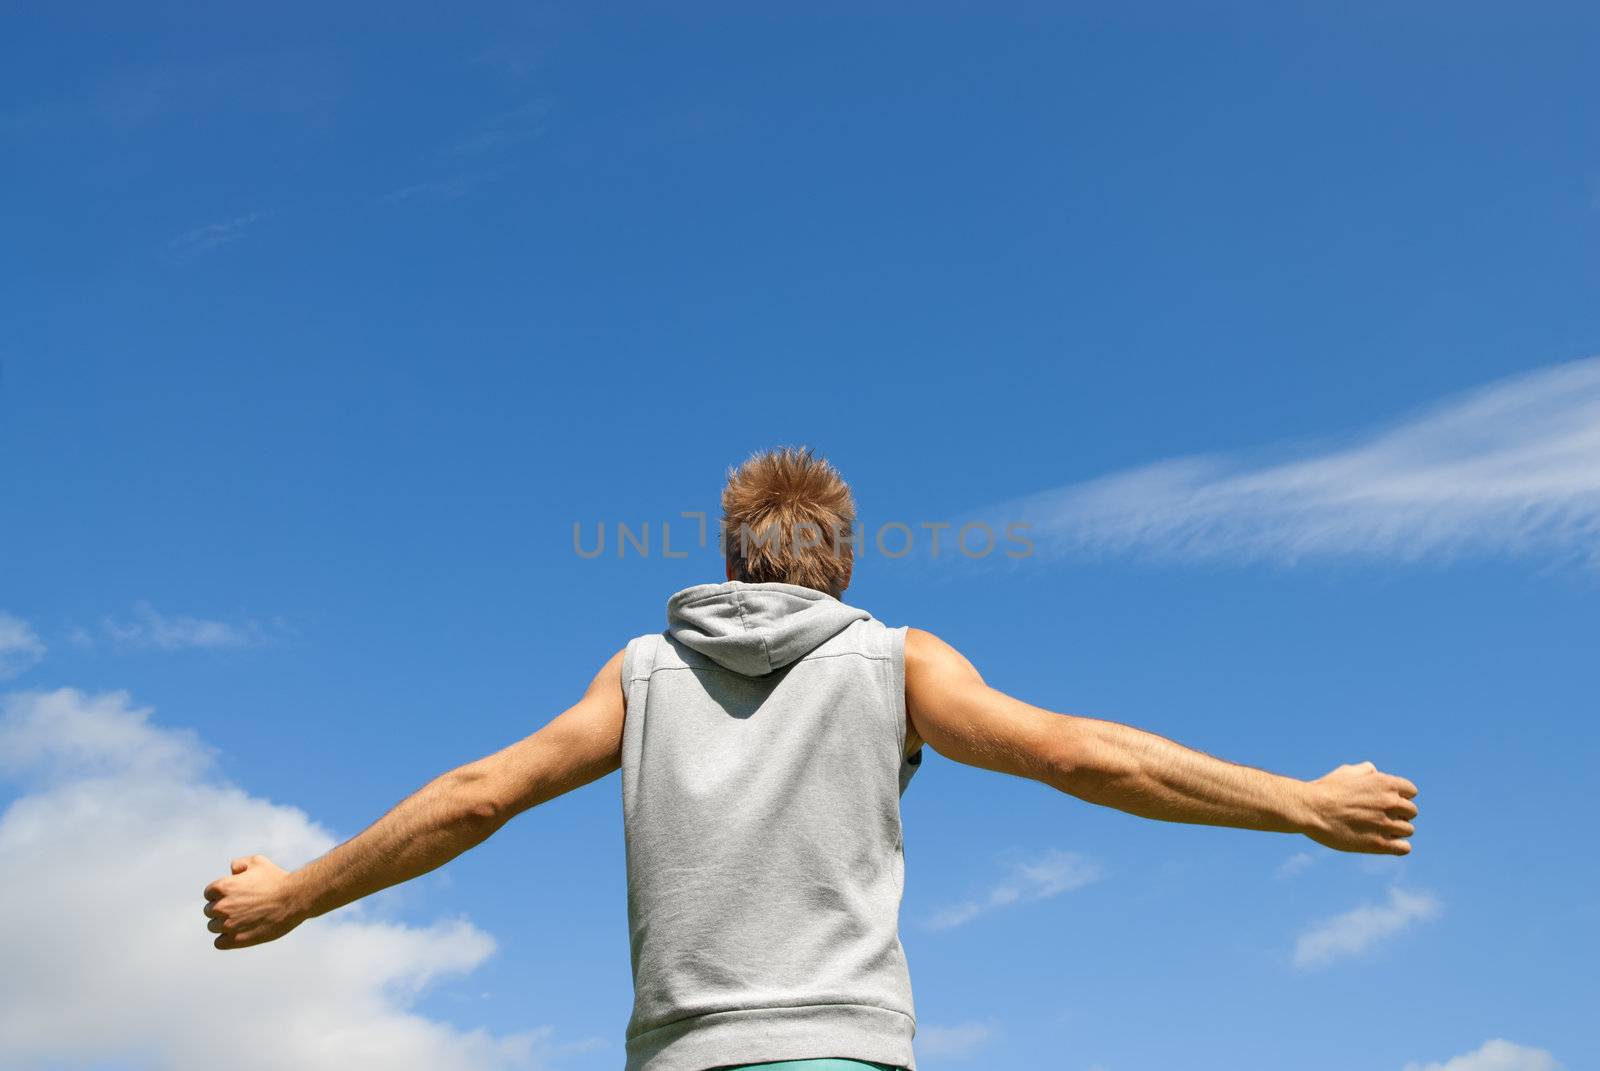 Guy in sports clothing on blue sky background by anikasalsera